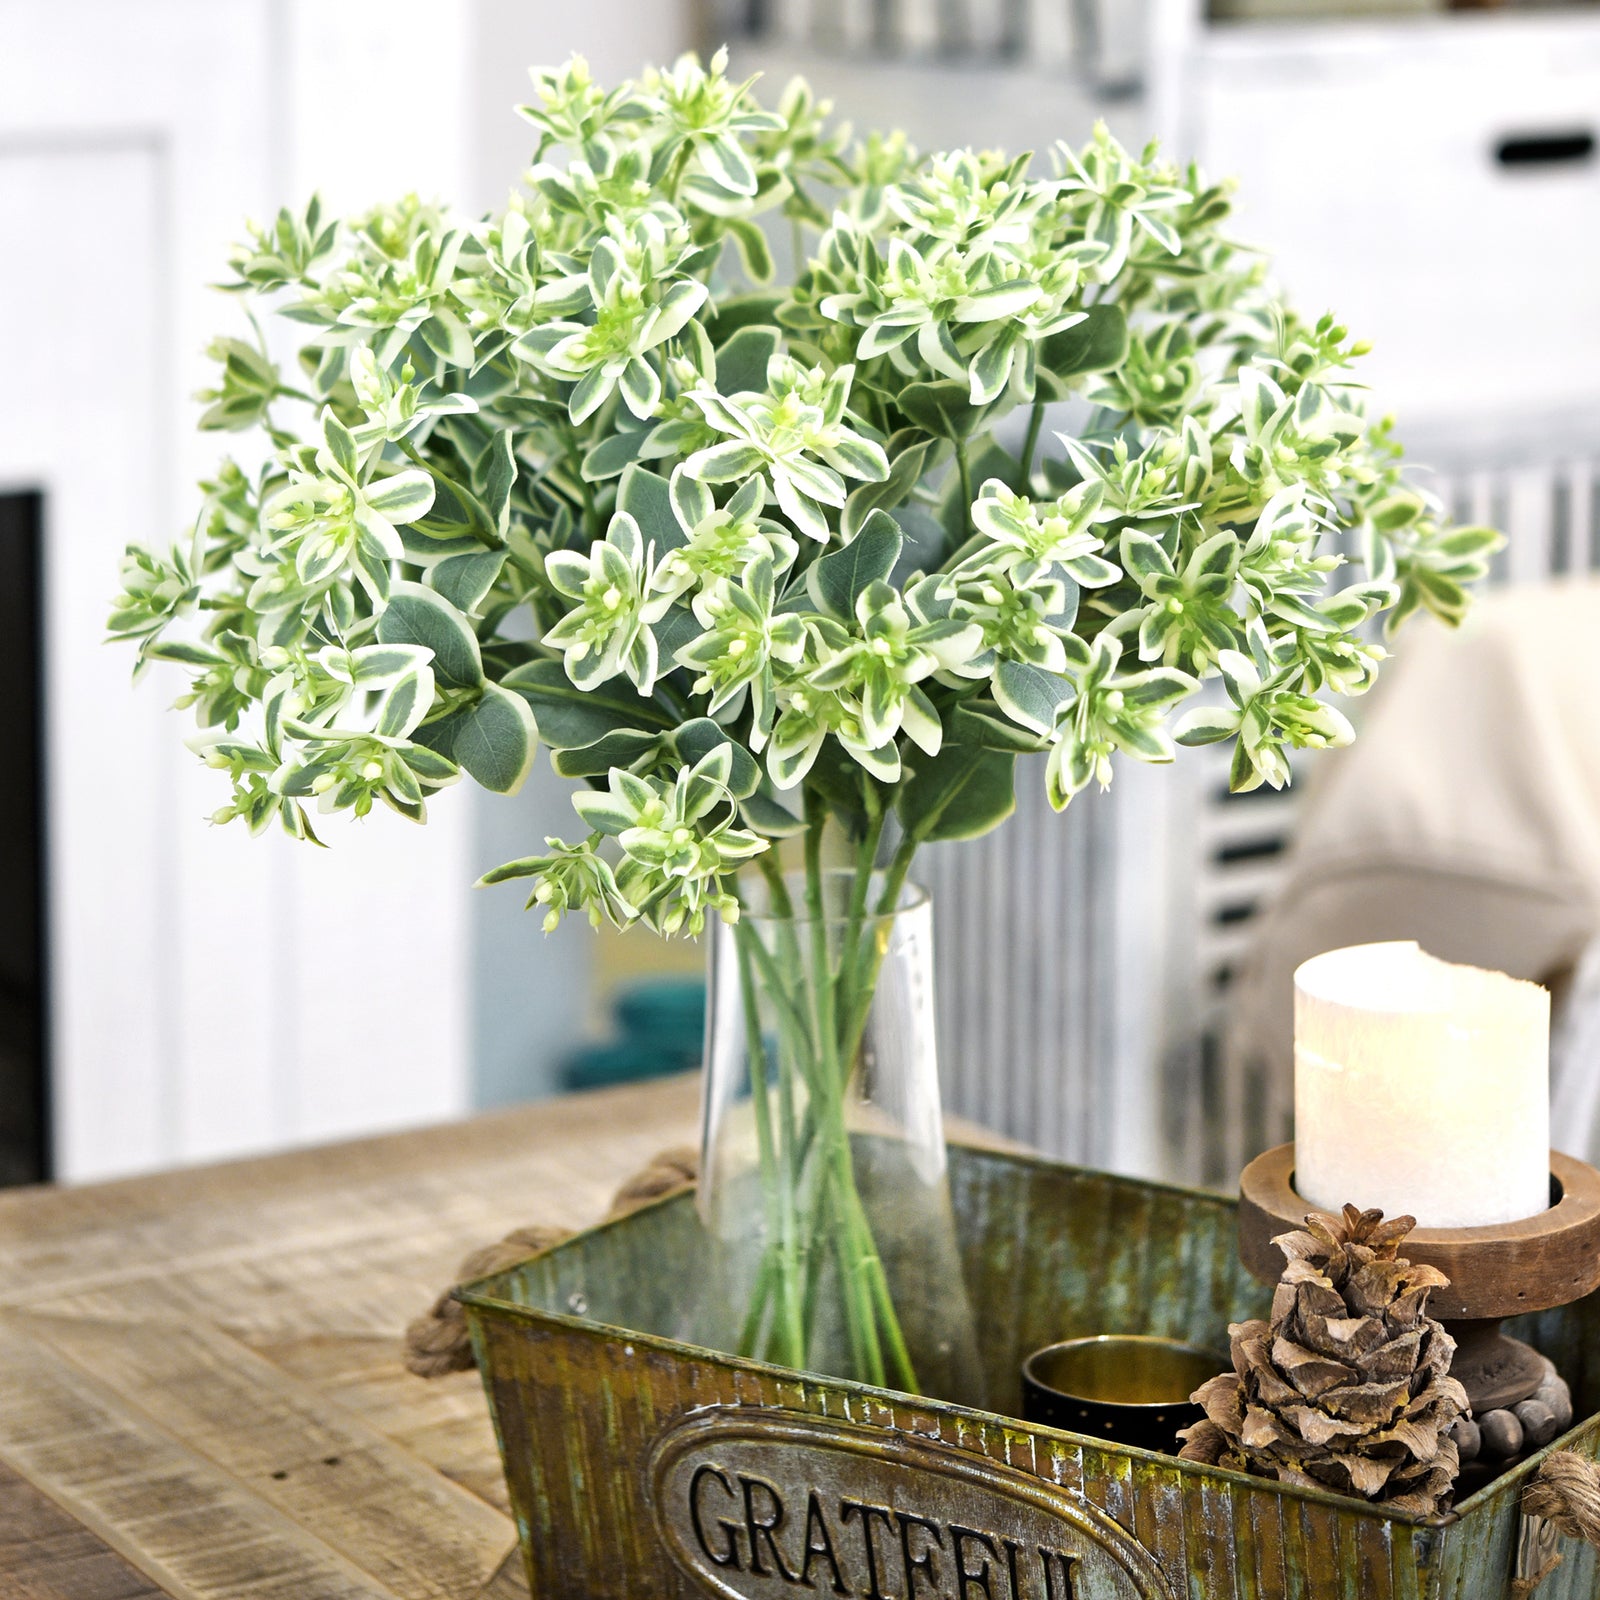 FiveSeasonStuff Snow on the Mountain Euphorbia Marginata Artificial Leaves and Branches Filler Greenery 18 inches 6 Stems